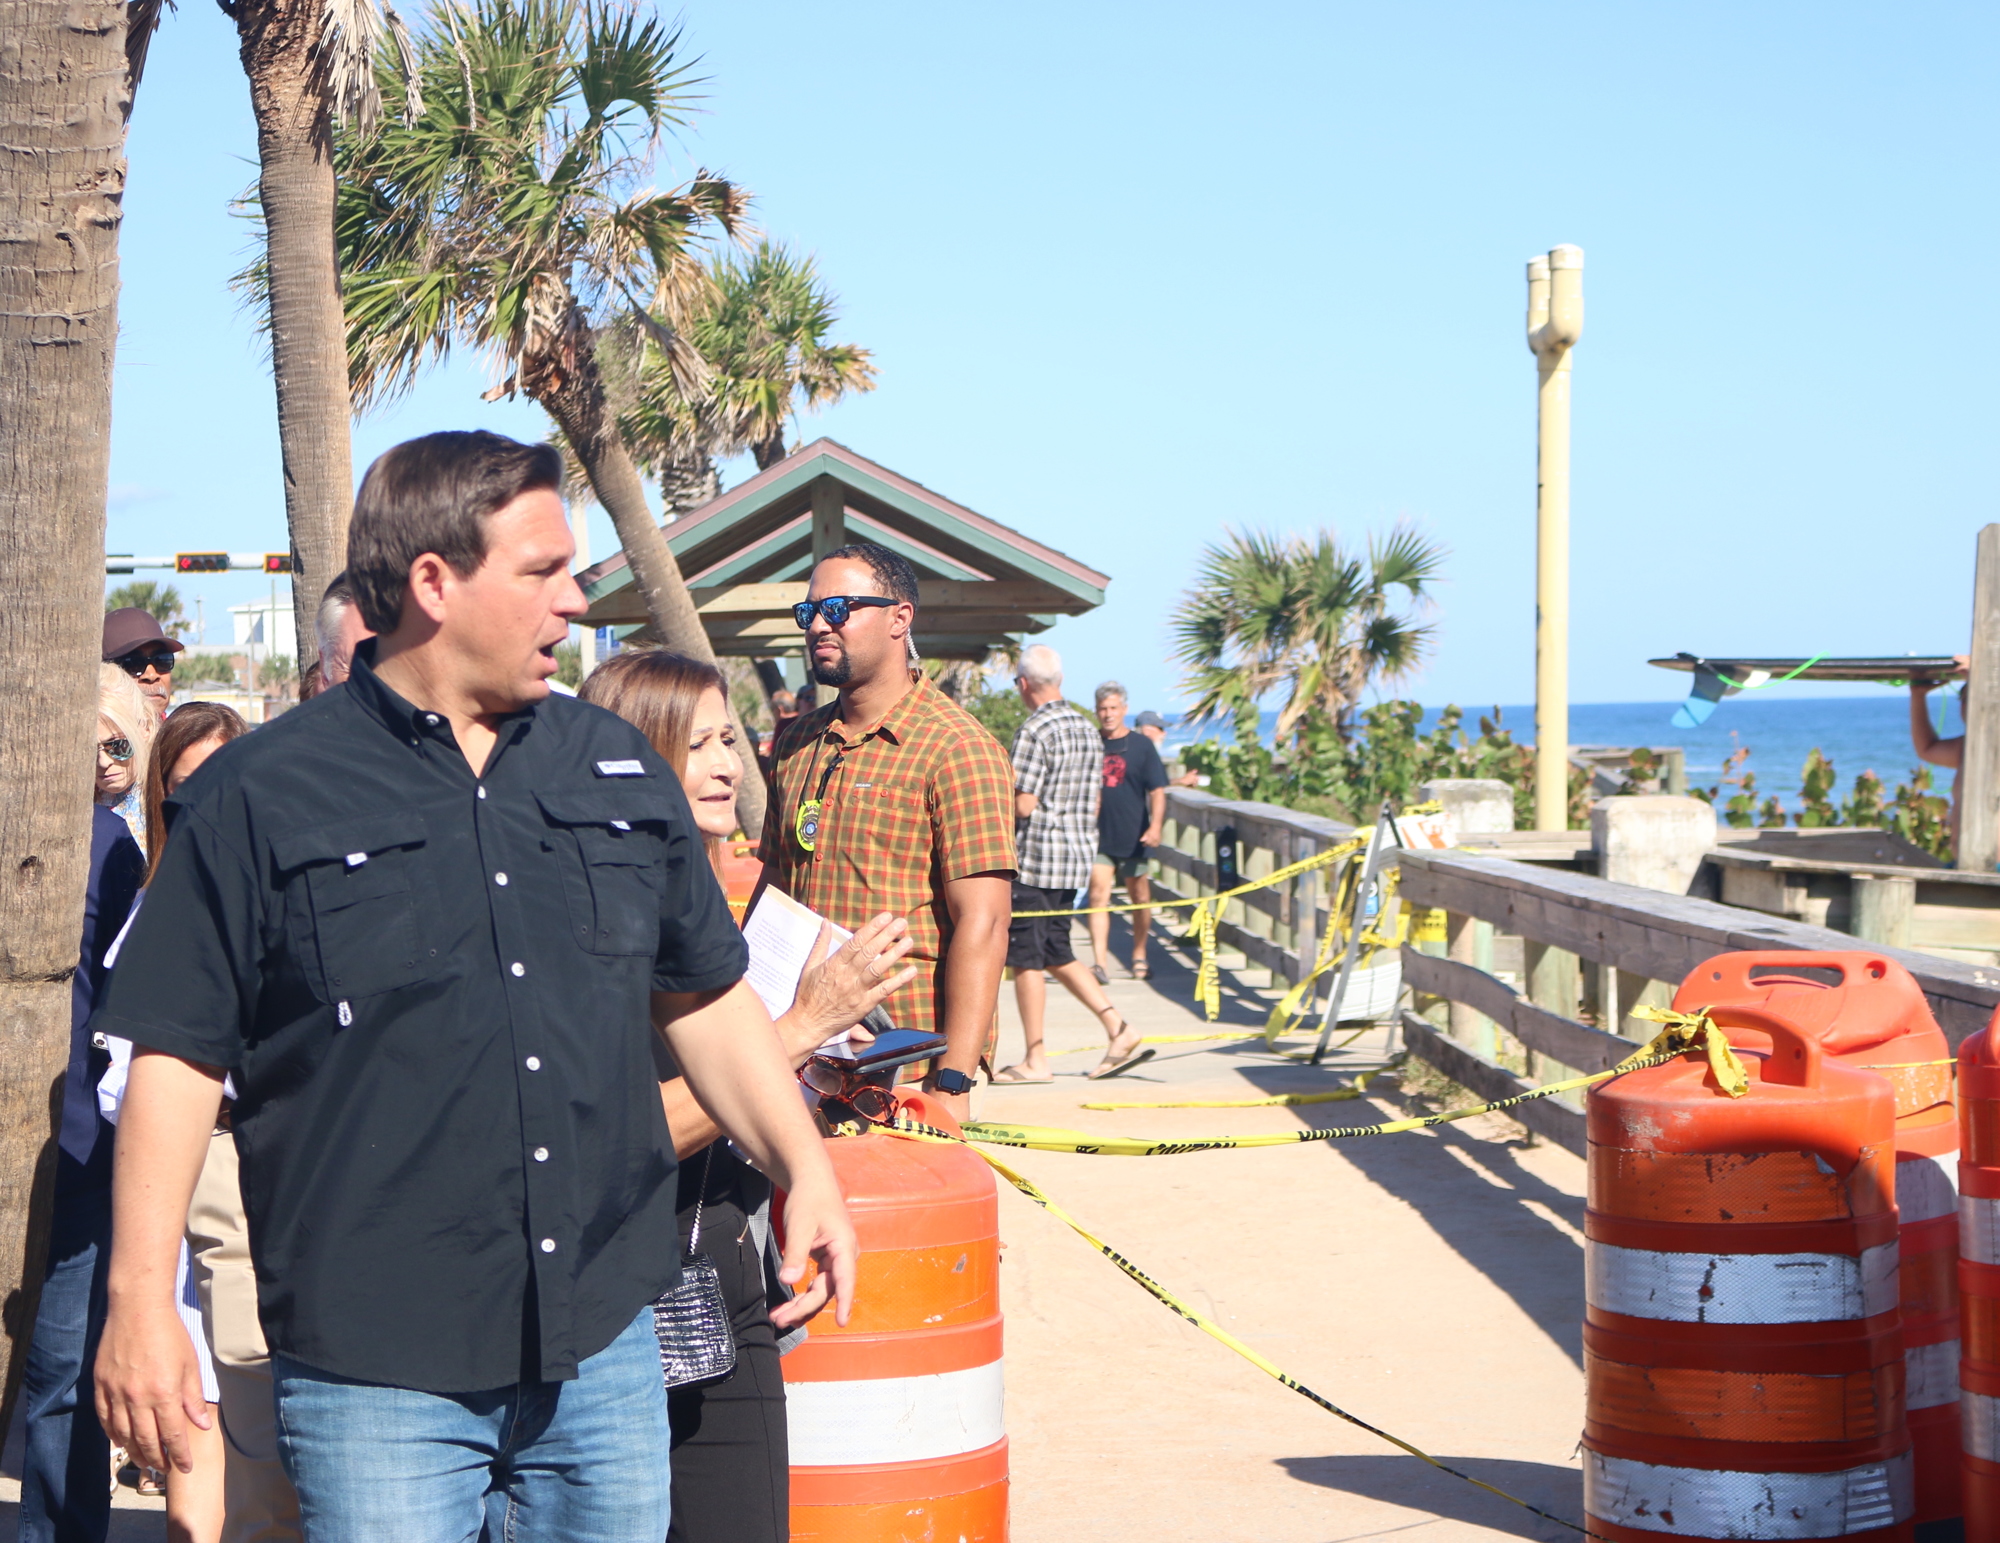 County engineer Faith Alkhatib (right) shows Florida Governor Ron DeSantis (left) the damage to Flagler Beach pier and beach. Photo by Sierra Williams